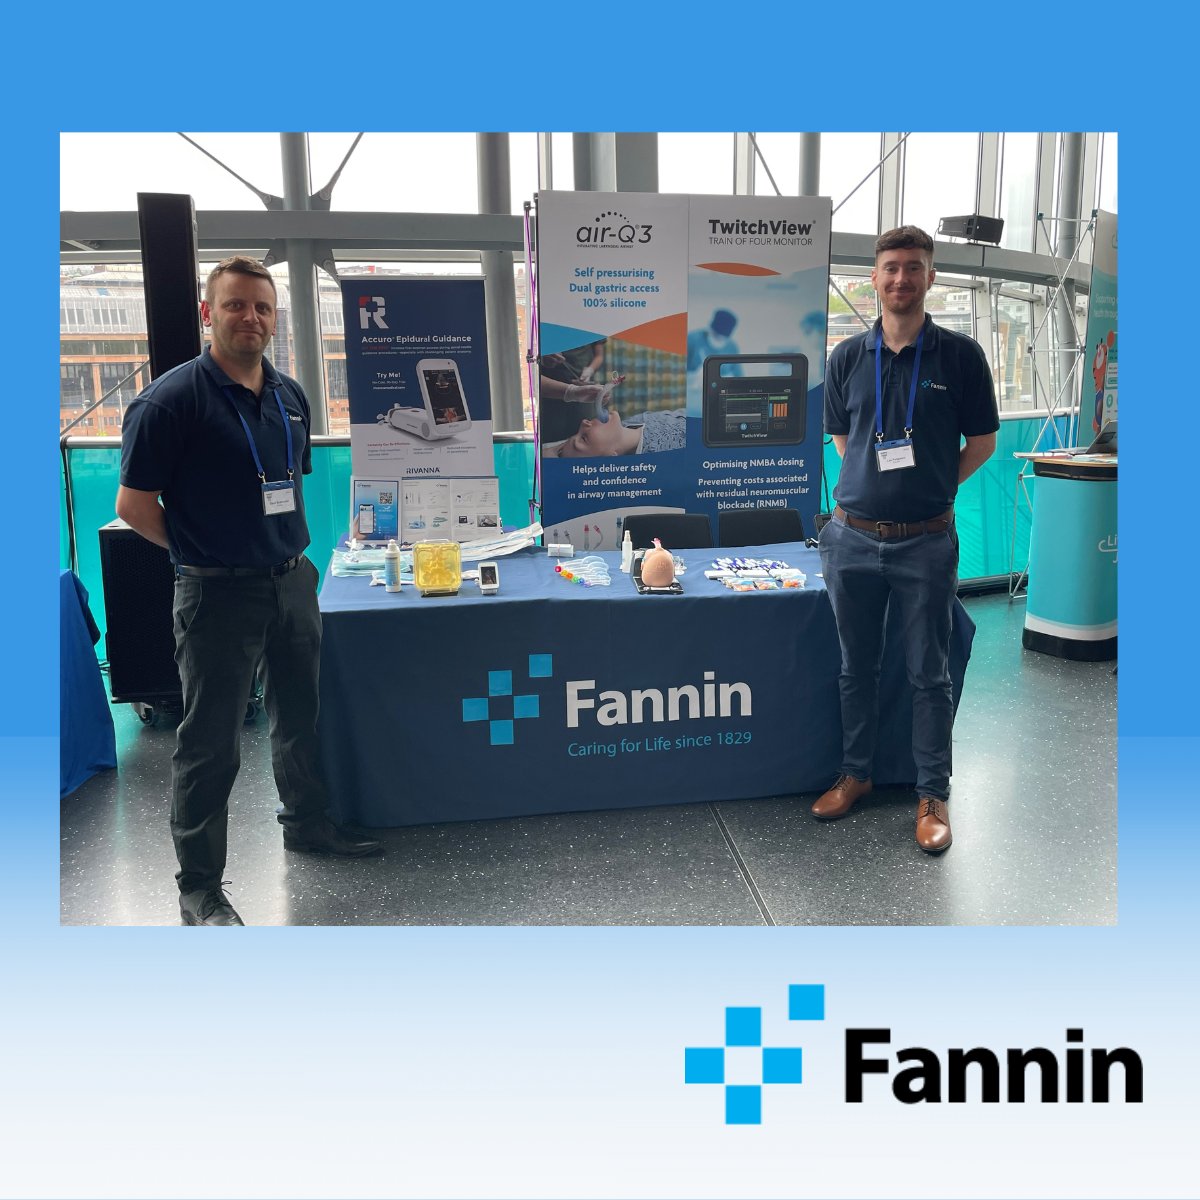 After a great day yesterday, we're excited to be at the APA meeting again today! Join us to learn, network, and advance pediatric anaesthesia. 

Swing by and say hello to Dave Bratherton & Lee Ferguson👋

#APAMeetings #PediatricAnaesthesia #Fannin